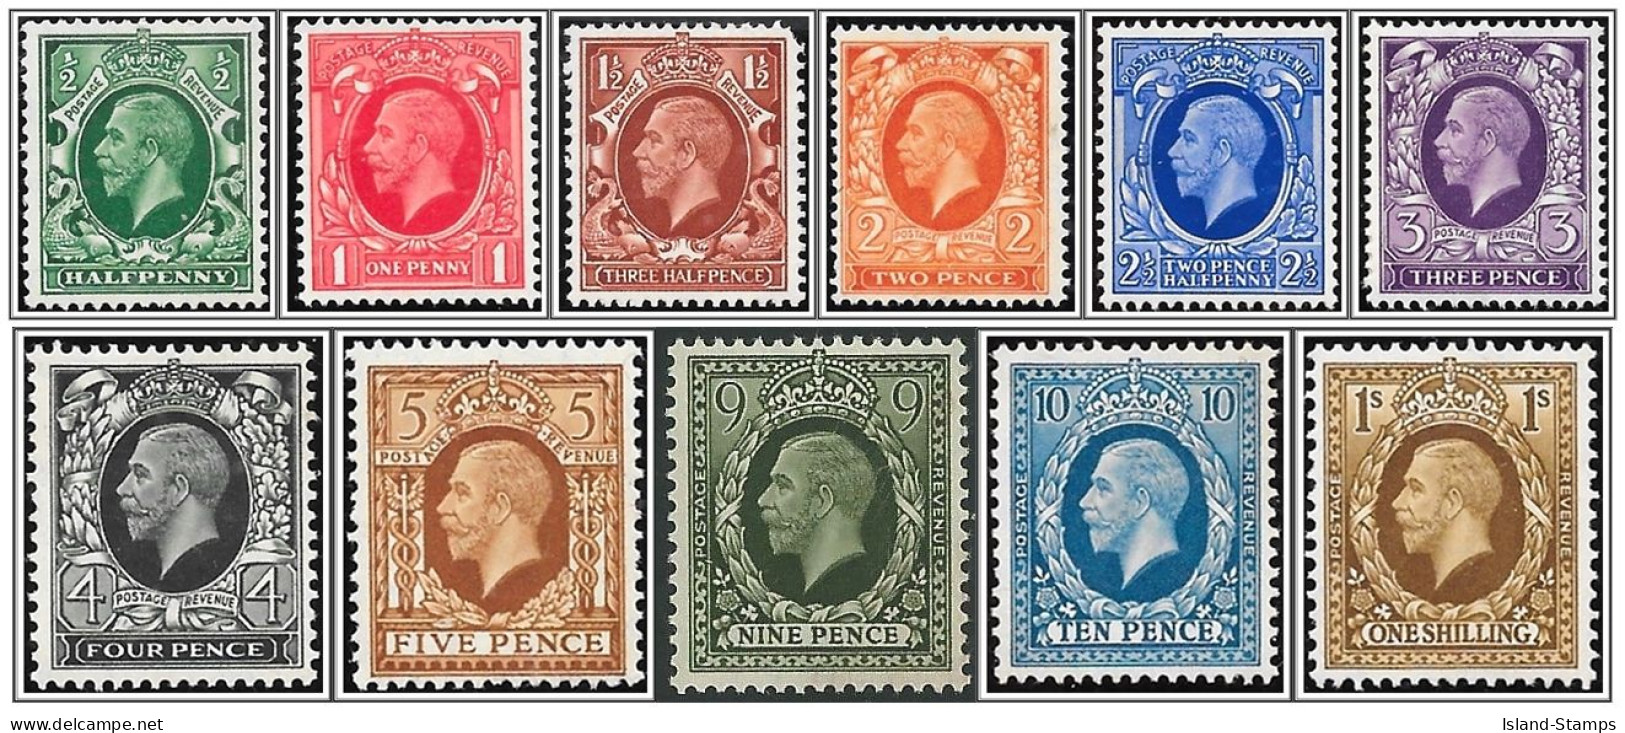 KGV Photogravure Set SG439-449 Mounted Mint Hrd2a - Unused Stamps